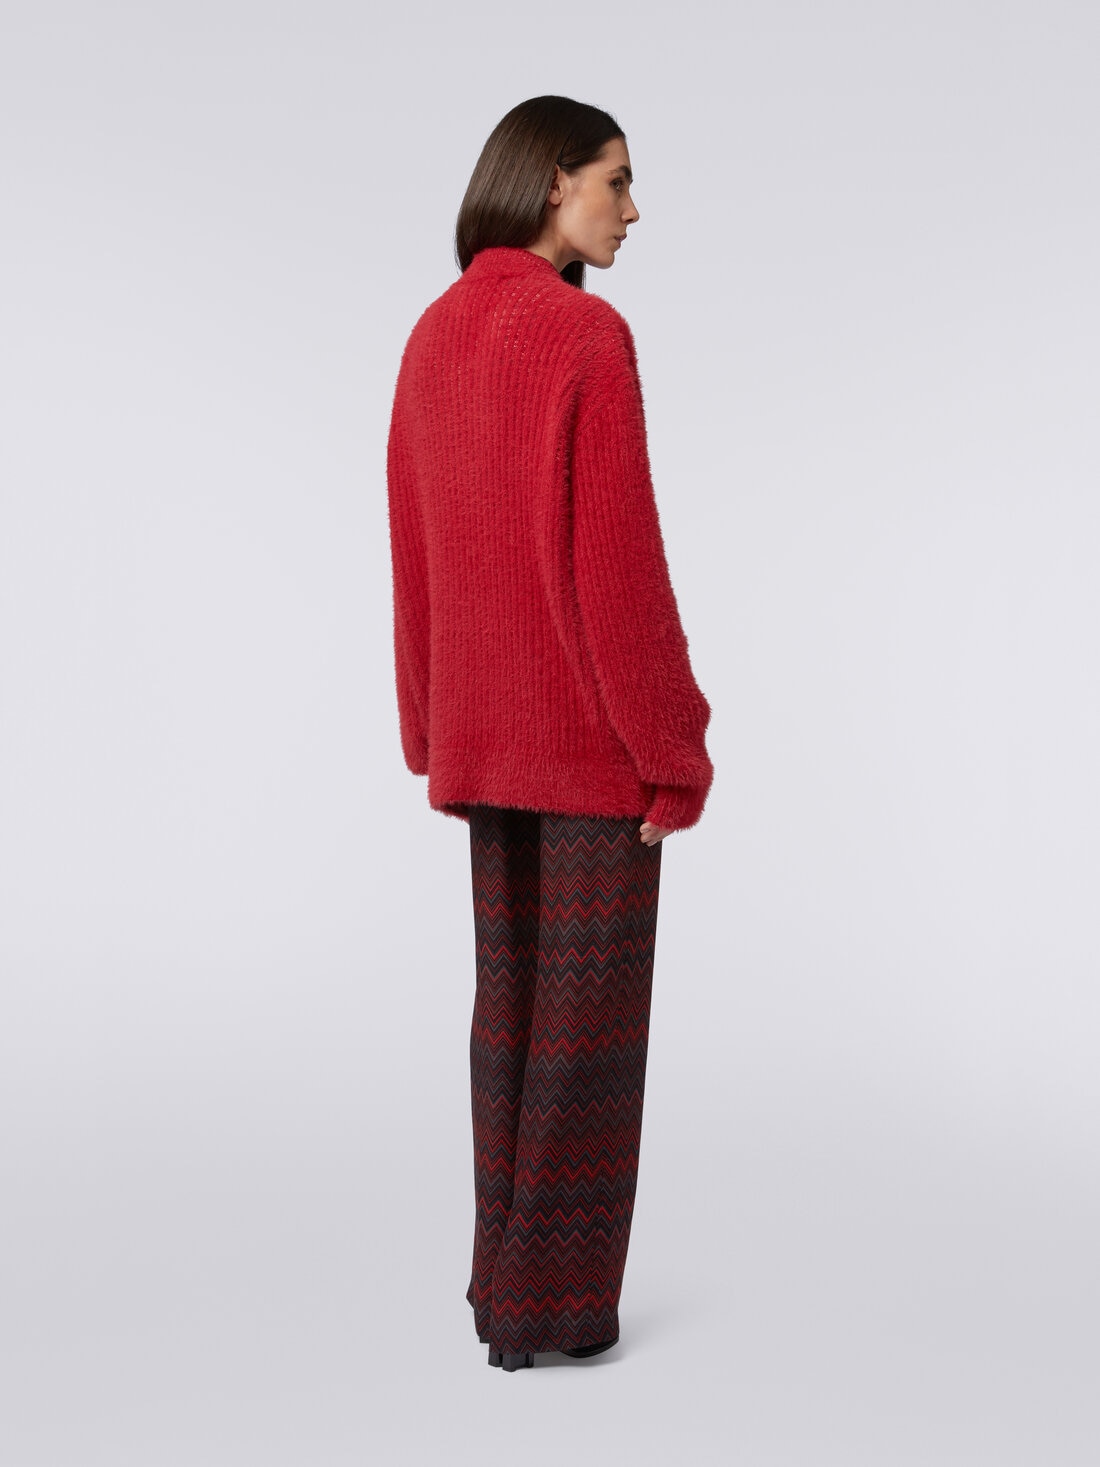 Oversized cardigan in fur-effect wool blend, Red  - DS24SM0WBK026I91559 - 3